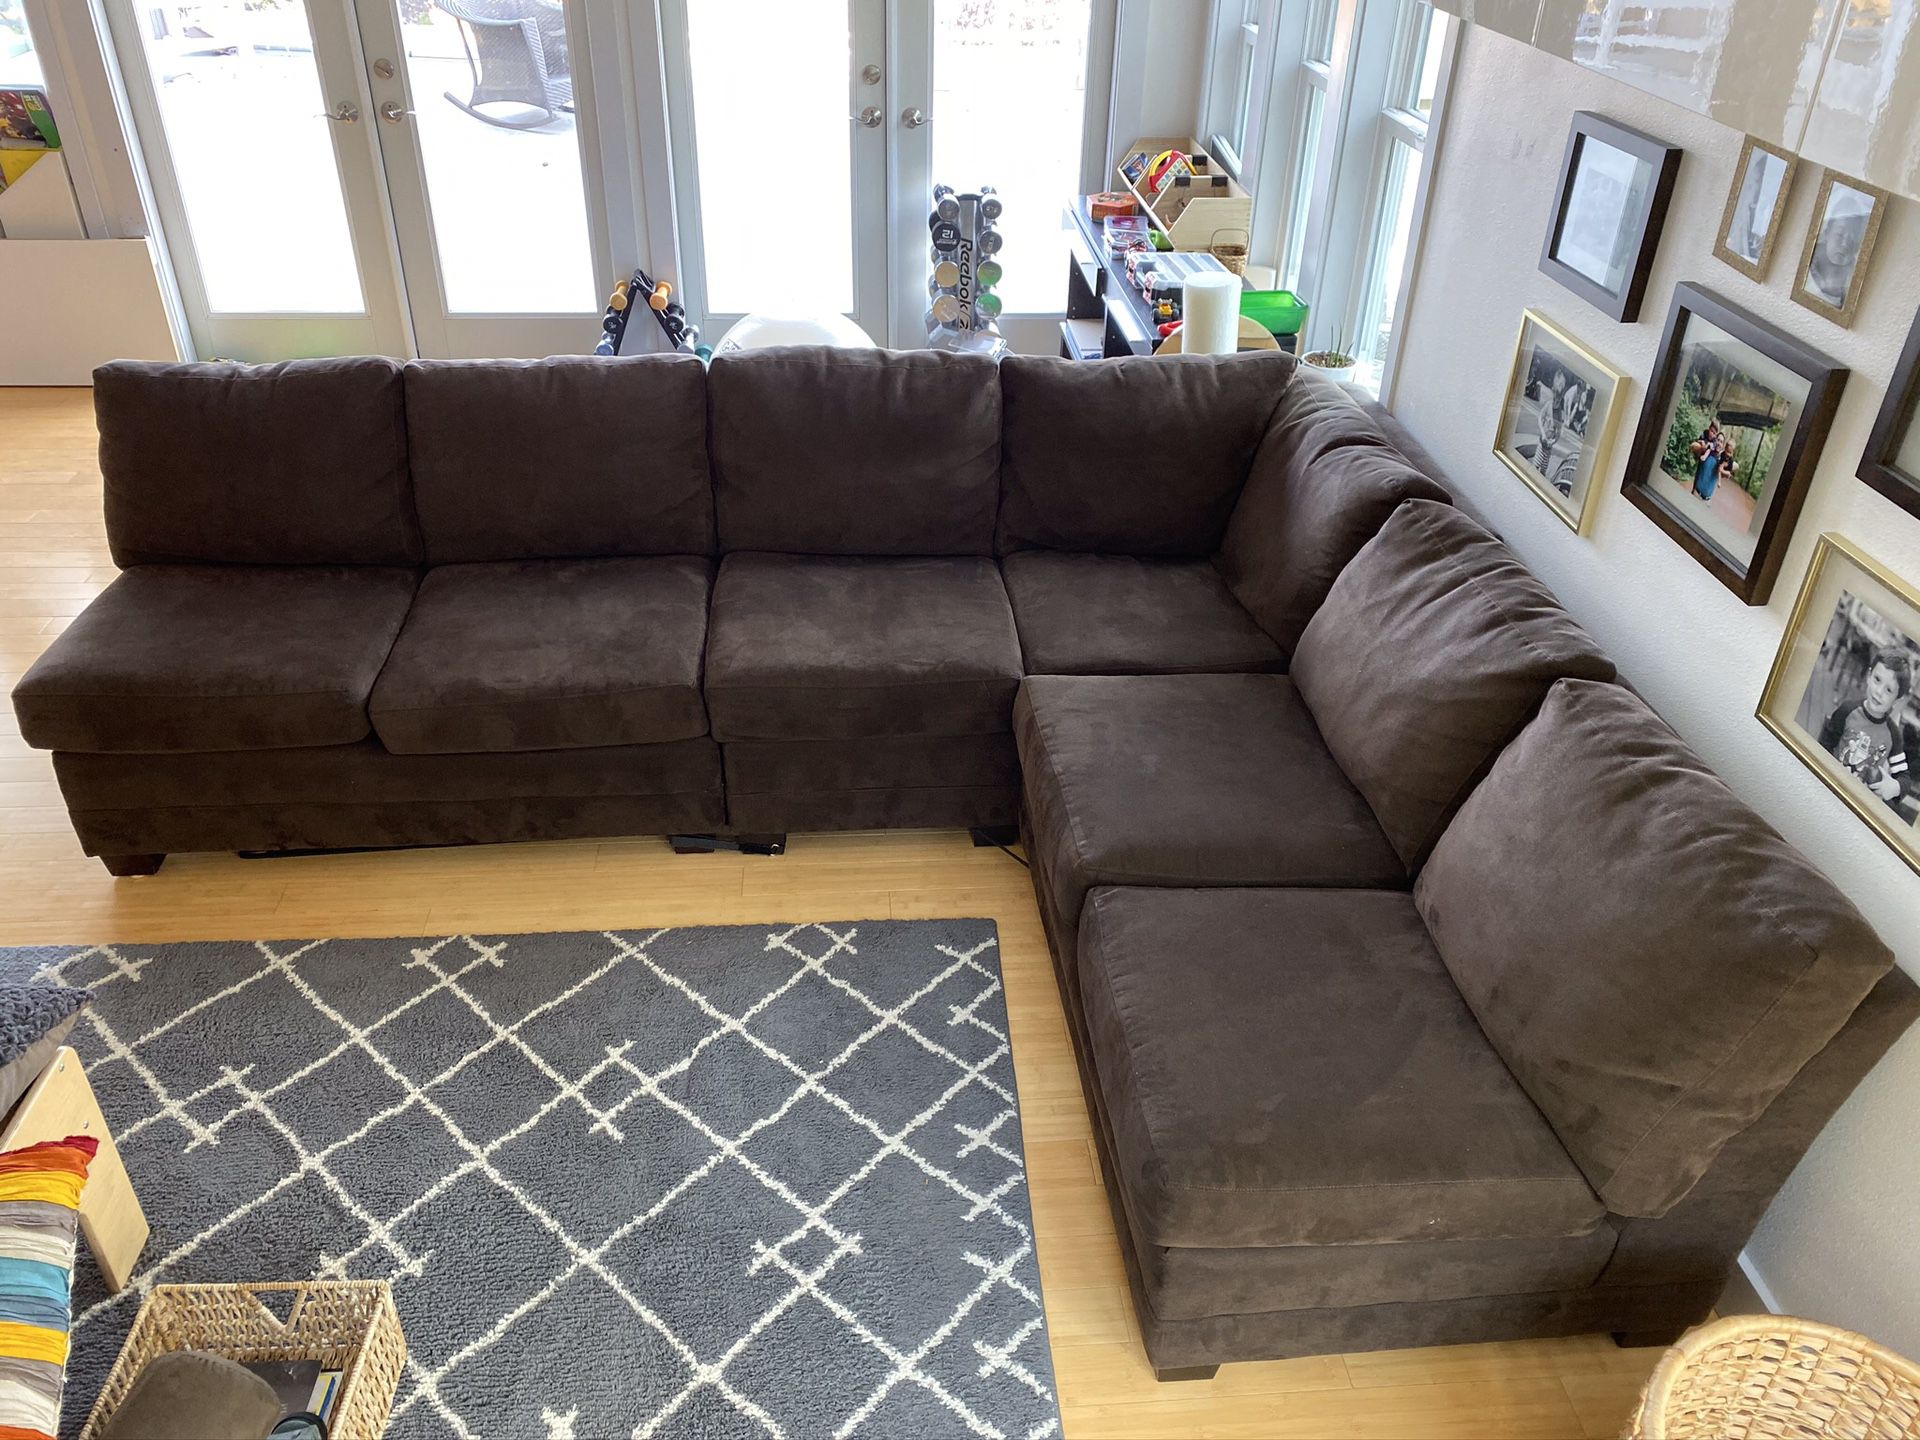 Crate & Barrel microfiber sectional couch/sofa